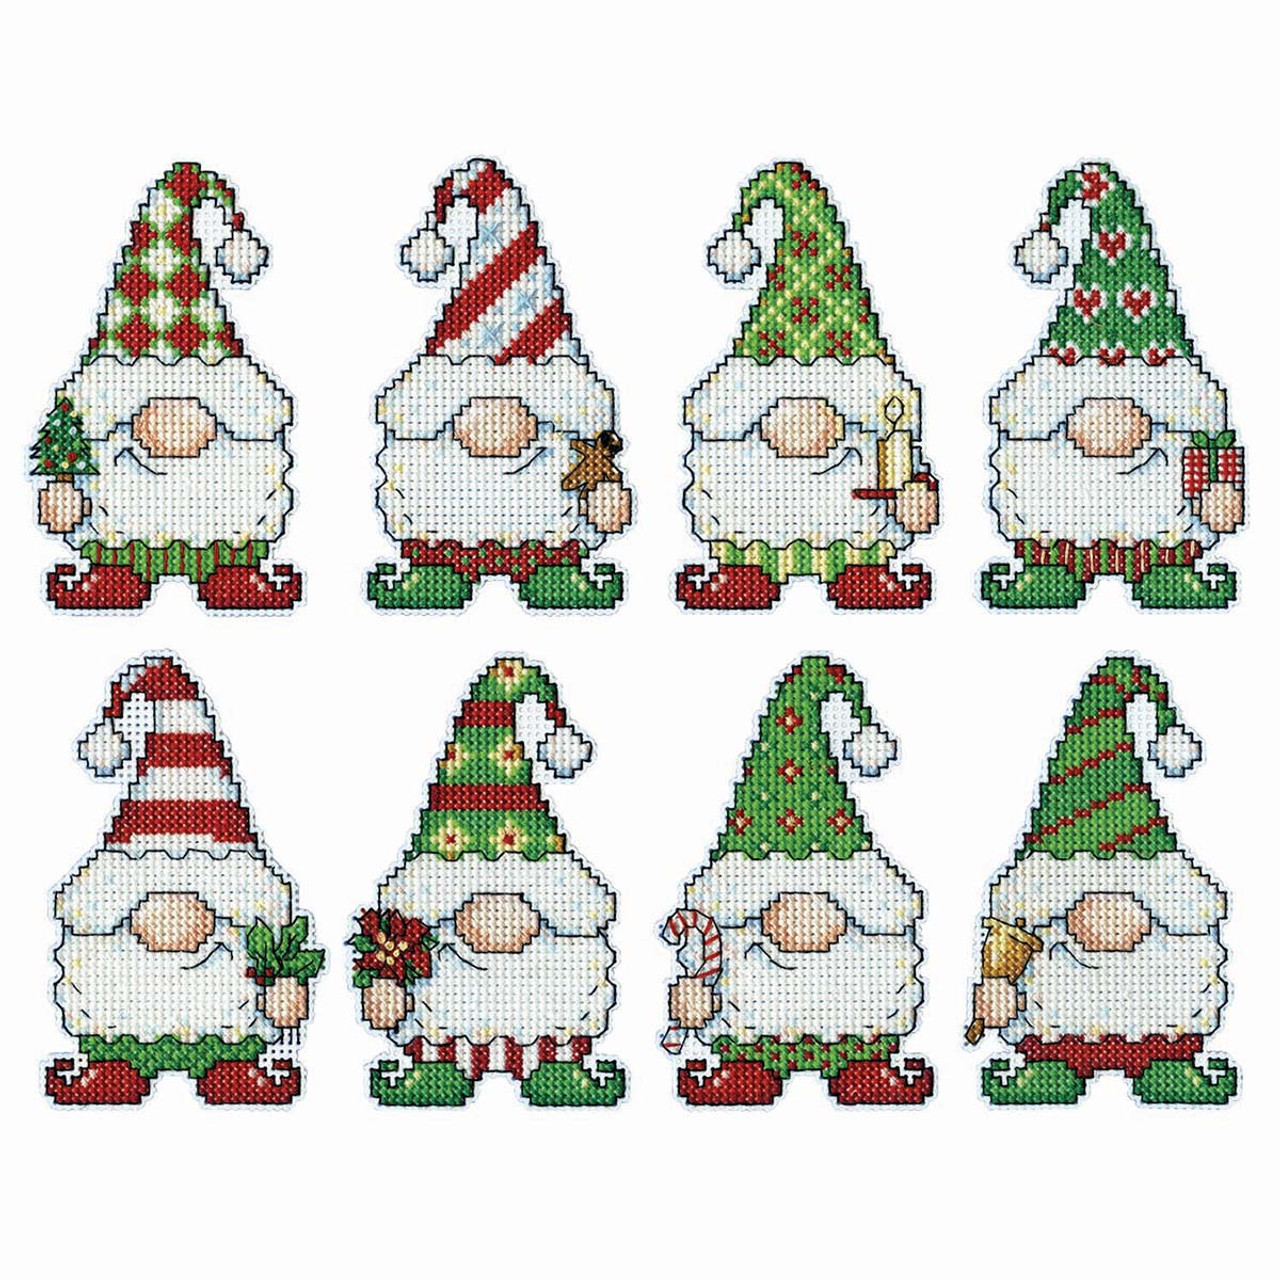 Christmas Gnomes | Counted Cross Stitch Pattern Book: Small and Fast Ornament Sized Holiday Designs | Great for Beginners